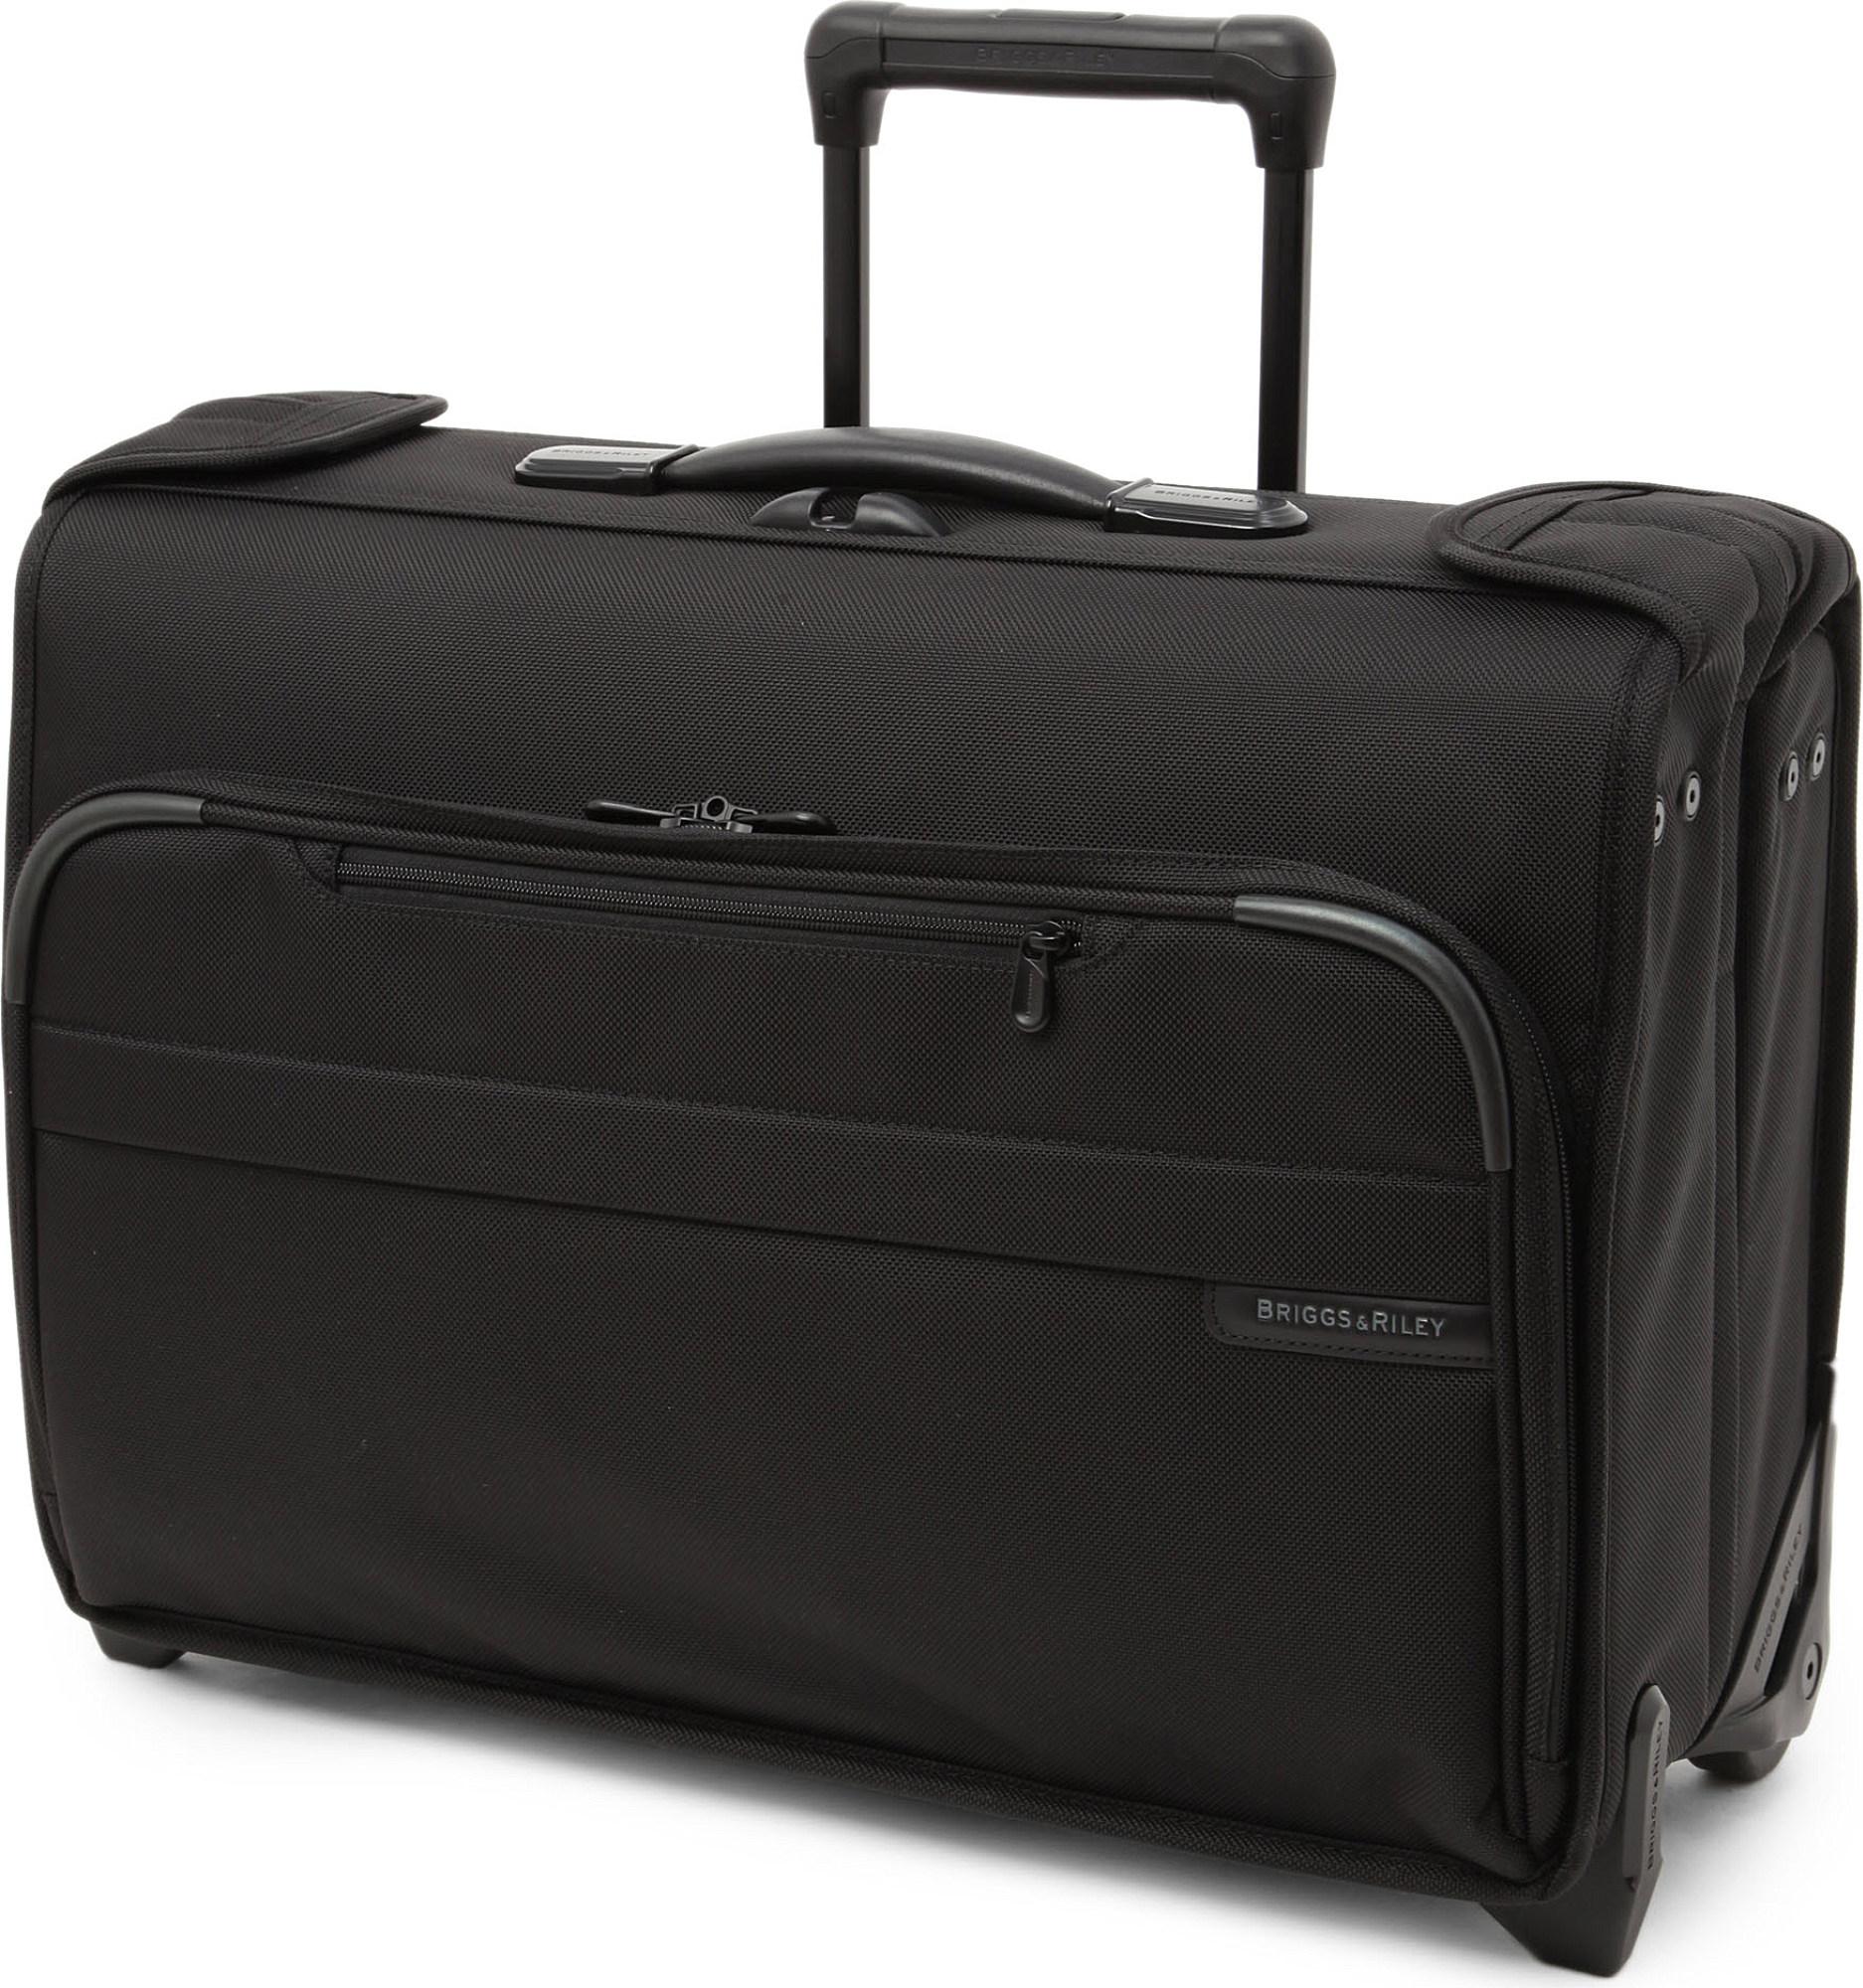 Lyst - Briggs & Riley Baseline Carry-on Suitcase in Black for Men